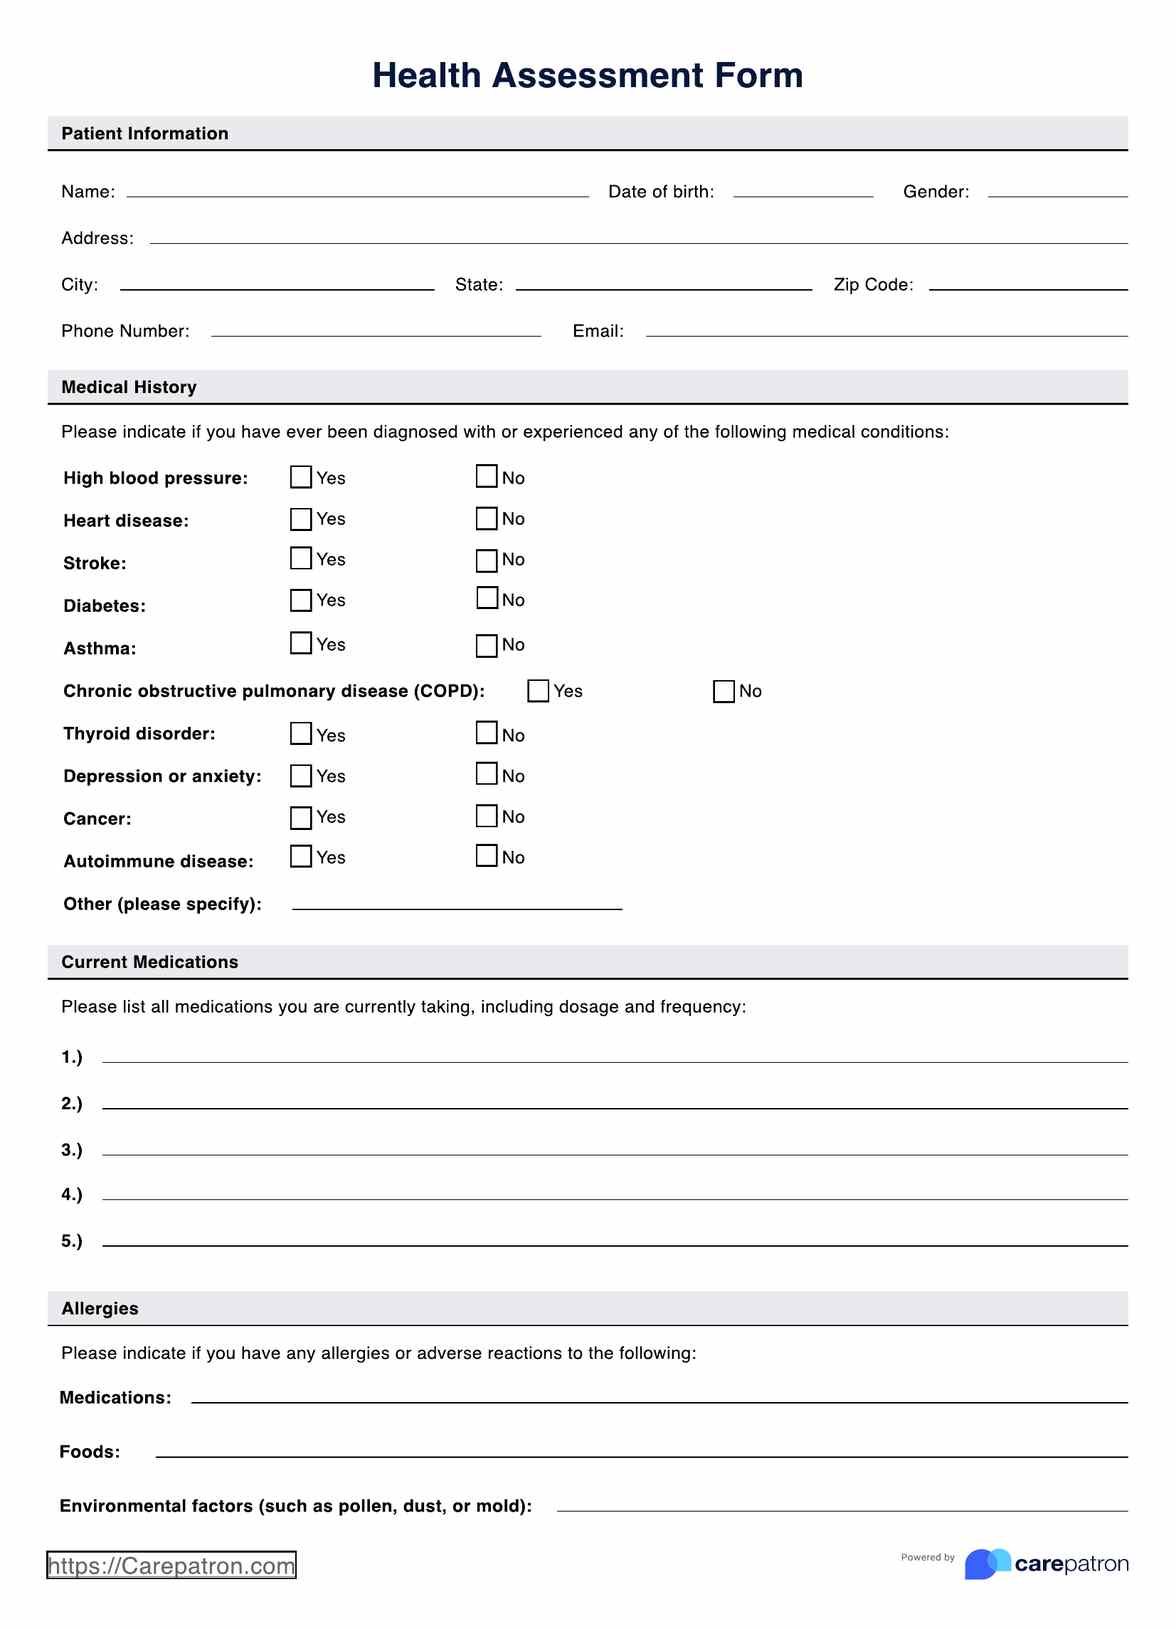 Health Assessment PDF Example